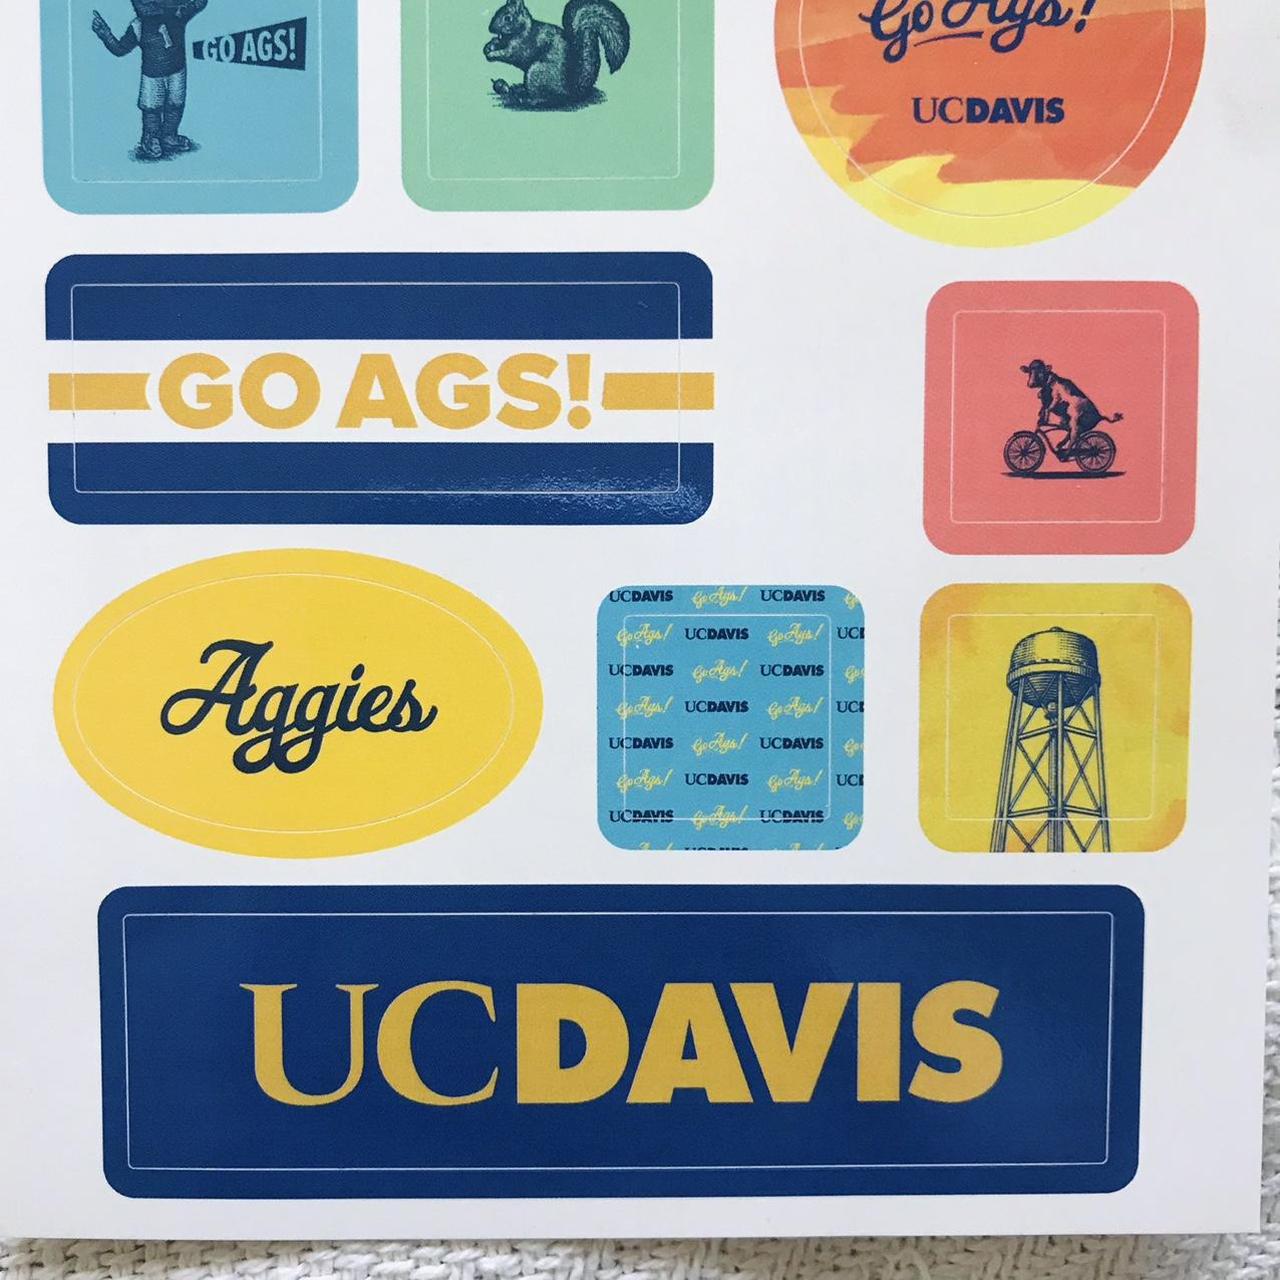 Product Image 2 - UC DAVIS STICKERS 💛📚

Great gift